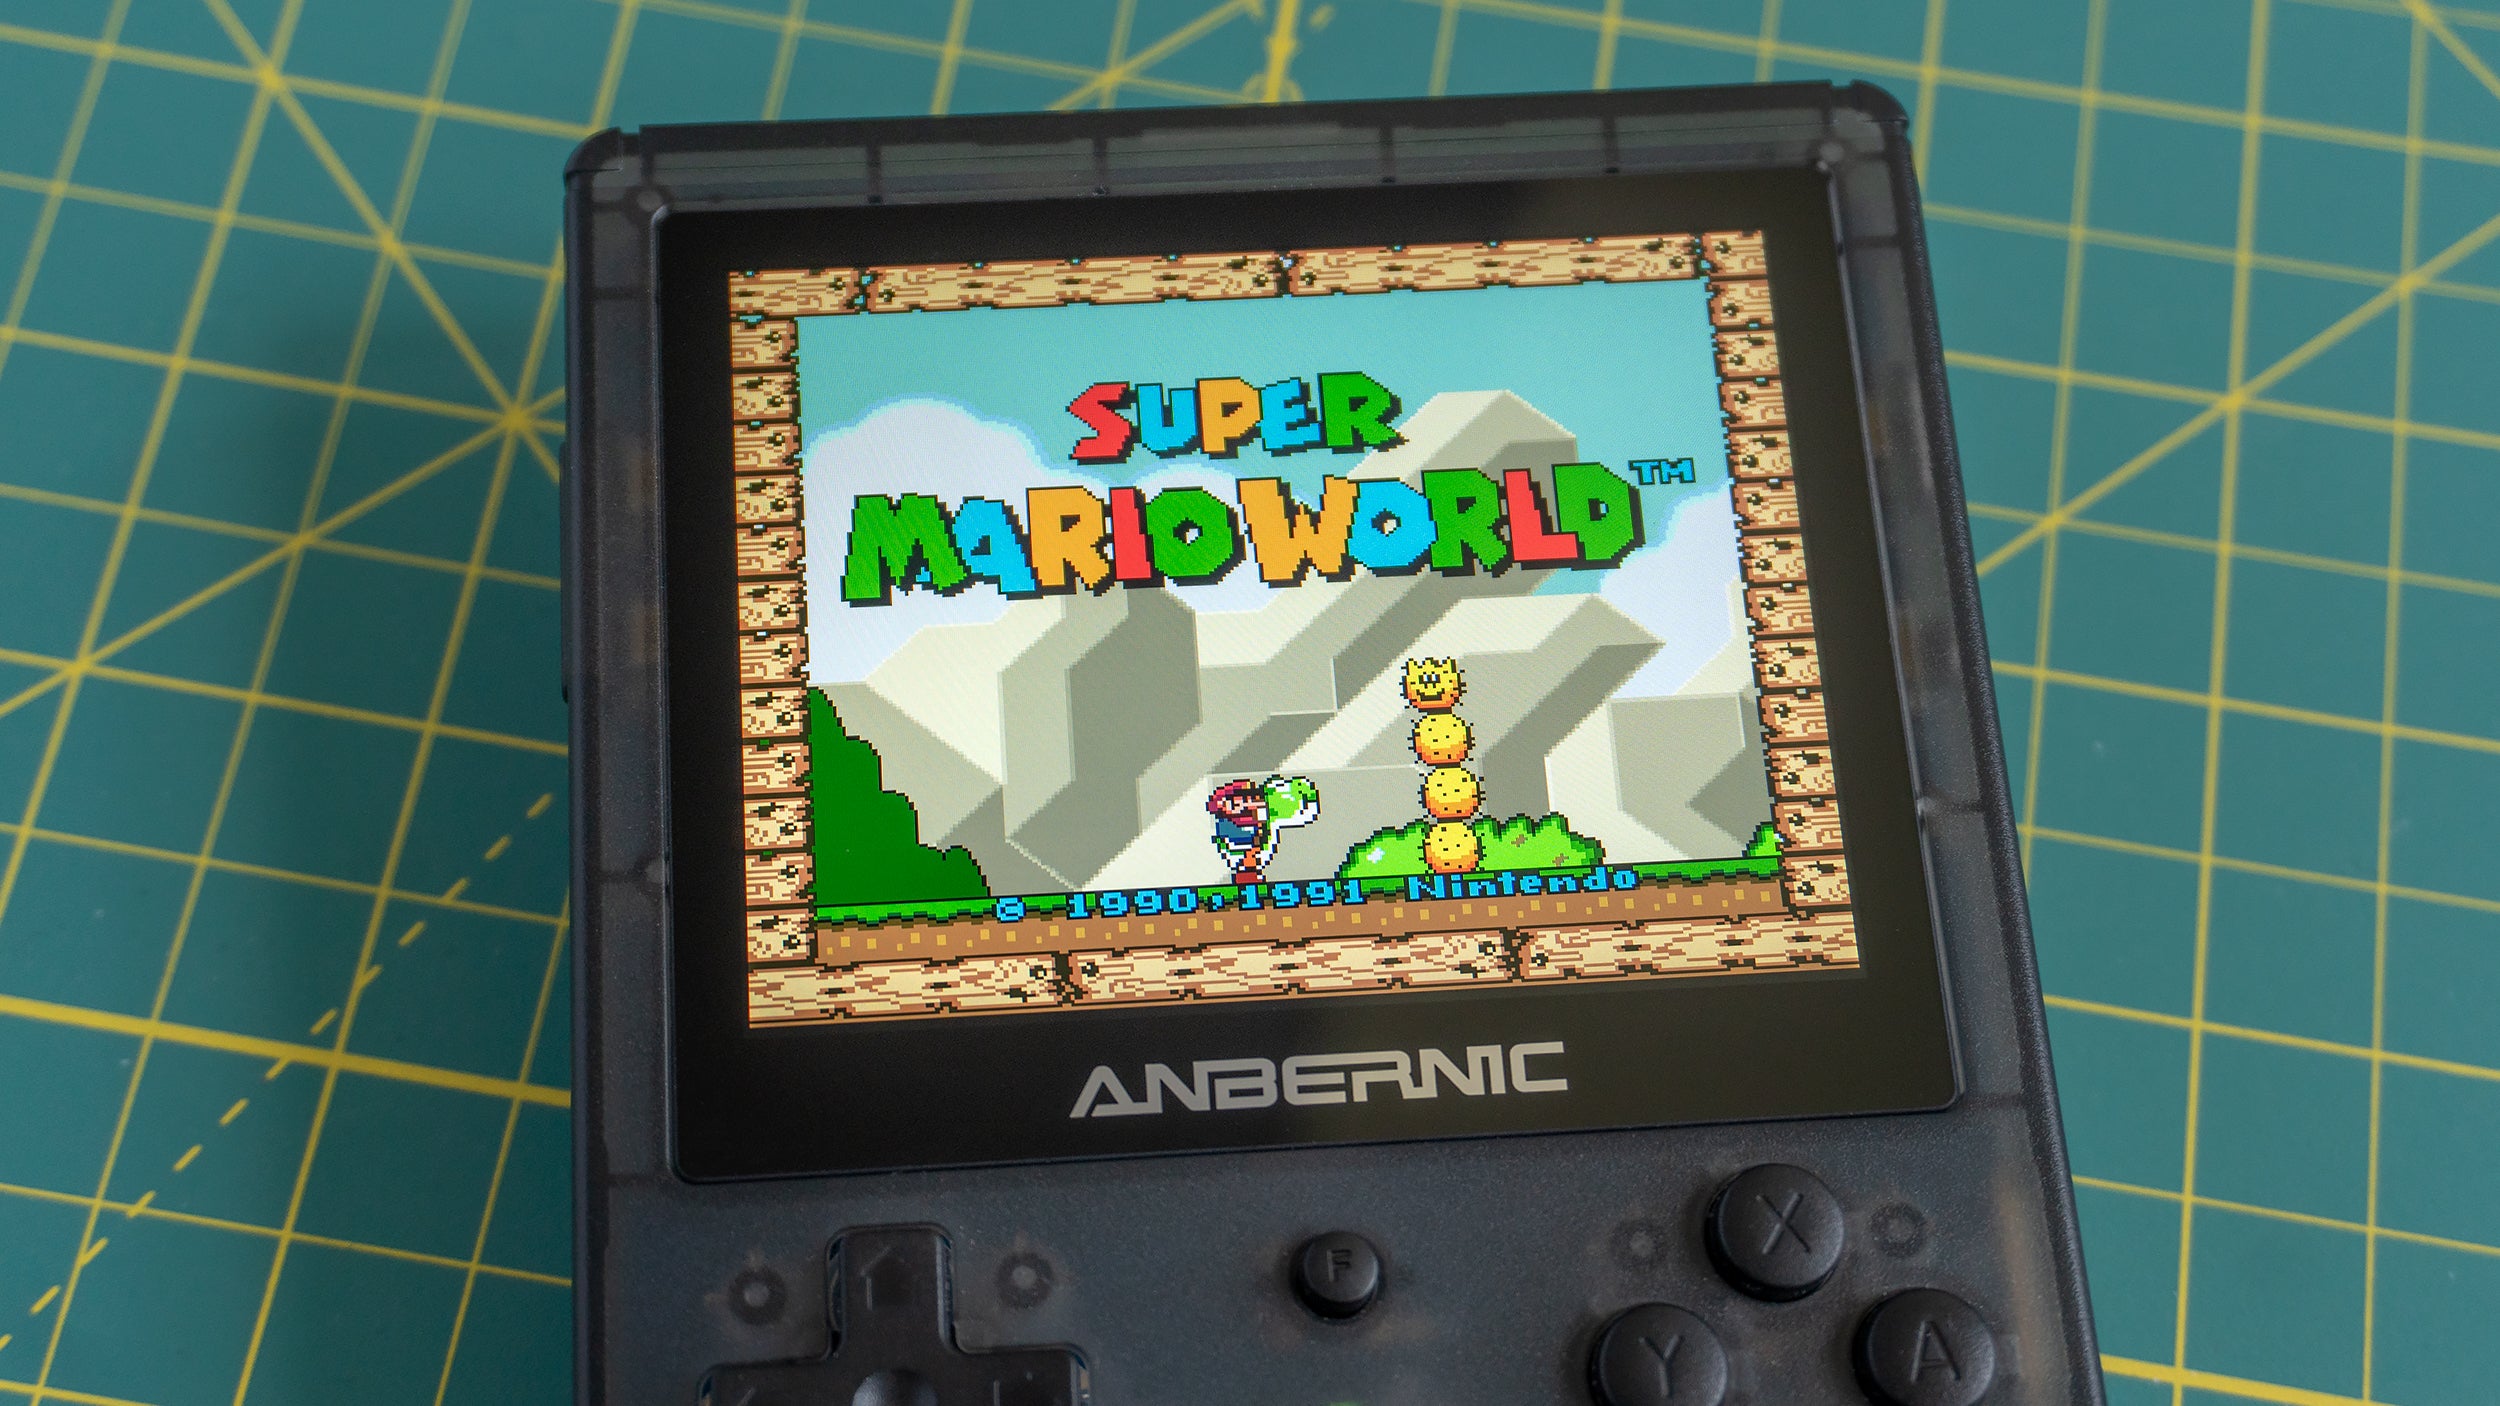 Although at 3.5-inches the RG351V's screen is the same you'll find on other Anbernic handhelds, it feels especially large and generous here, with a resolution of 640 x 480 that makes retro games look beautiful. (Photo: Andrew Liszewski/Gizmodo)